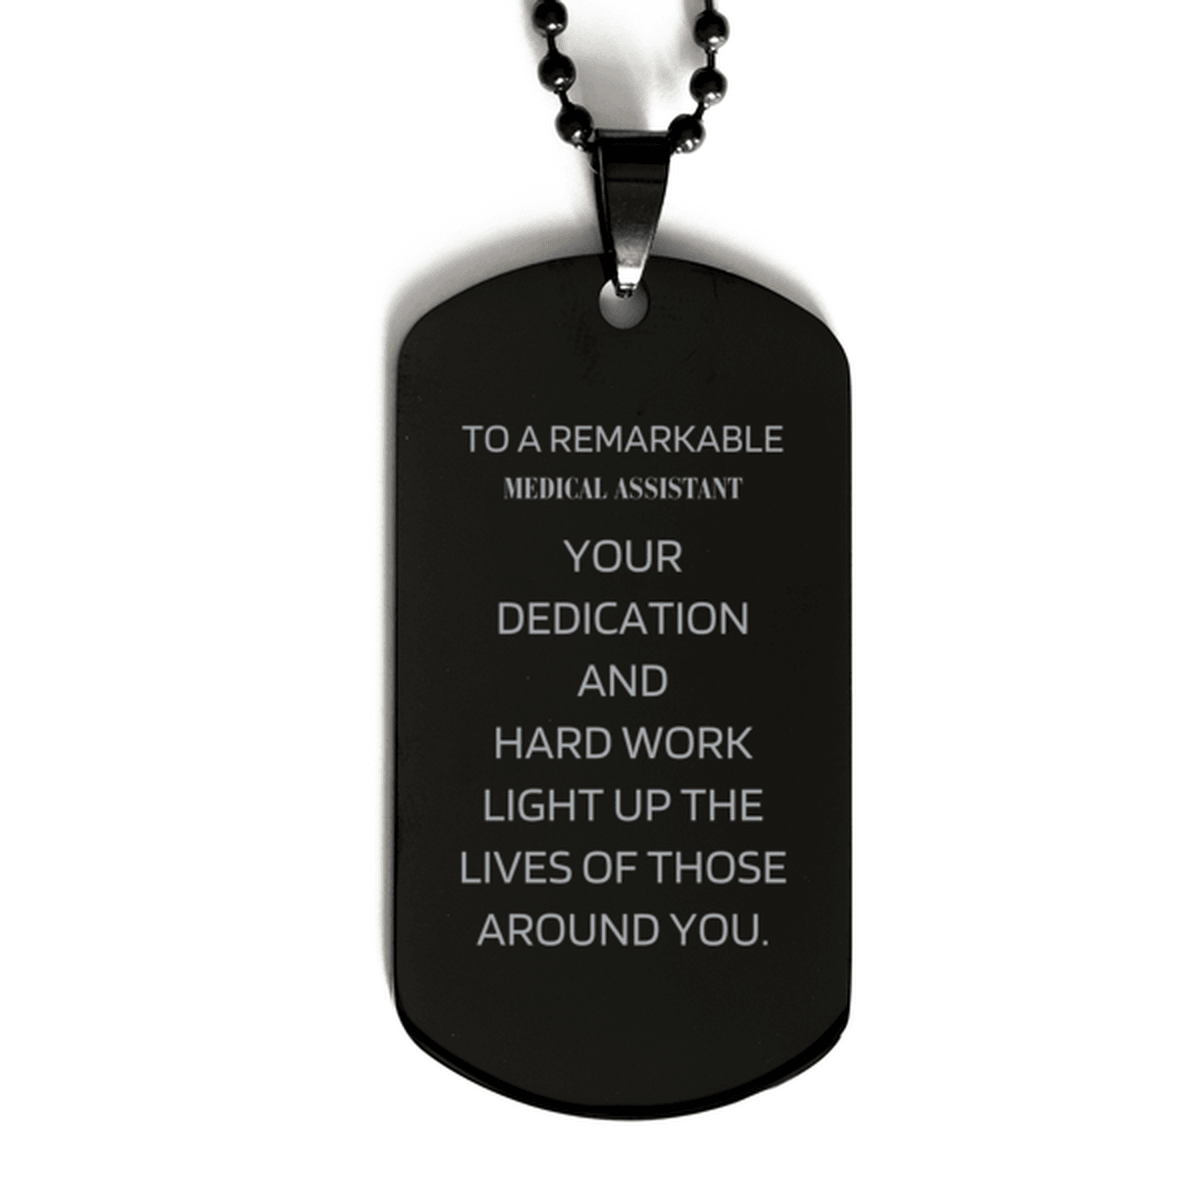 Remarkable Medical Assistant Gifts, Your dedication and hard work, Inspirational Birthday Christmas Unique Black Dog Tag For Medical Assistant, Coworkers, Men, Women, Friends - Mallard Moon Gift Shop